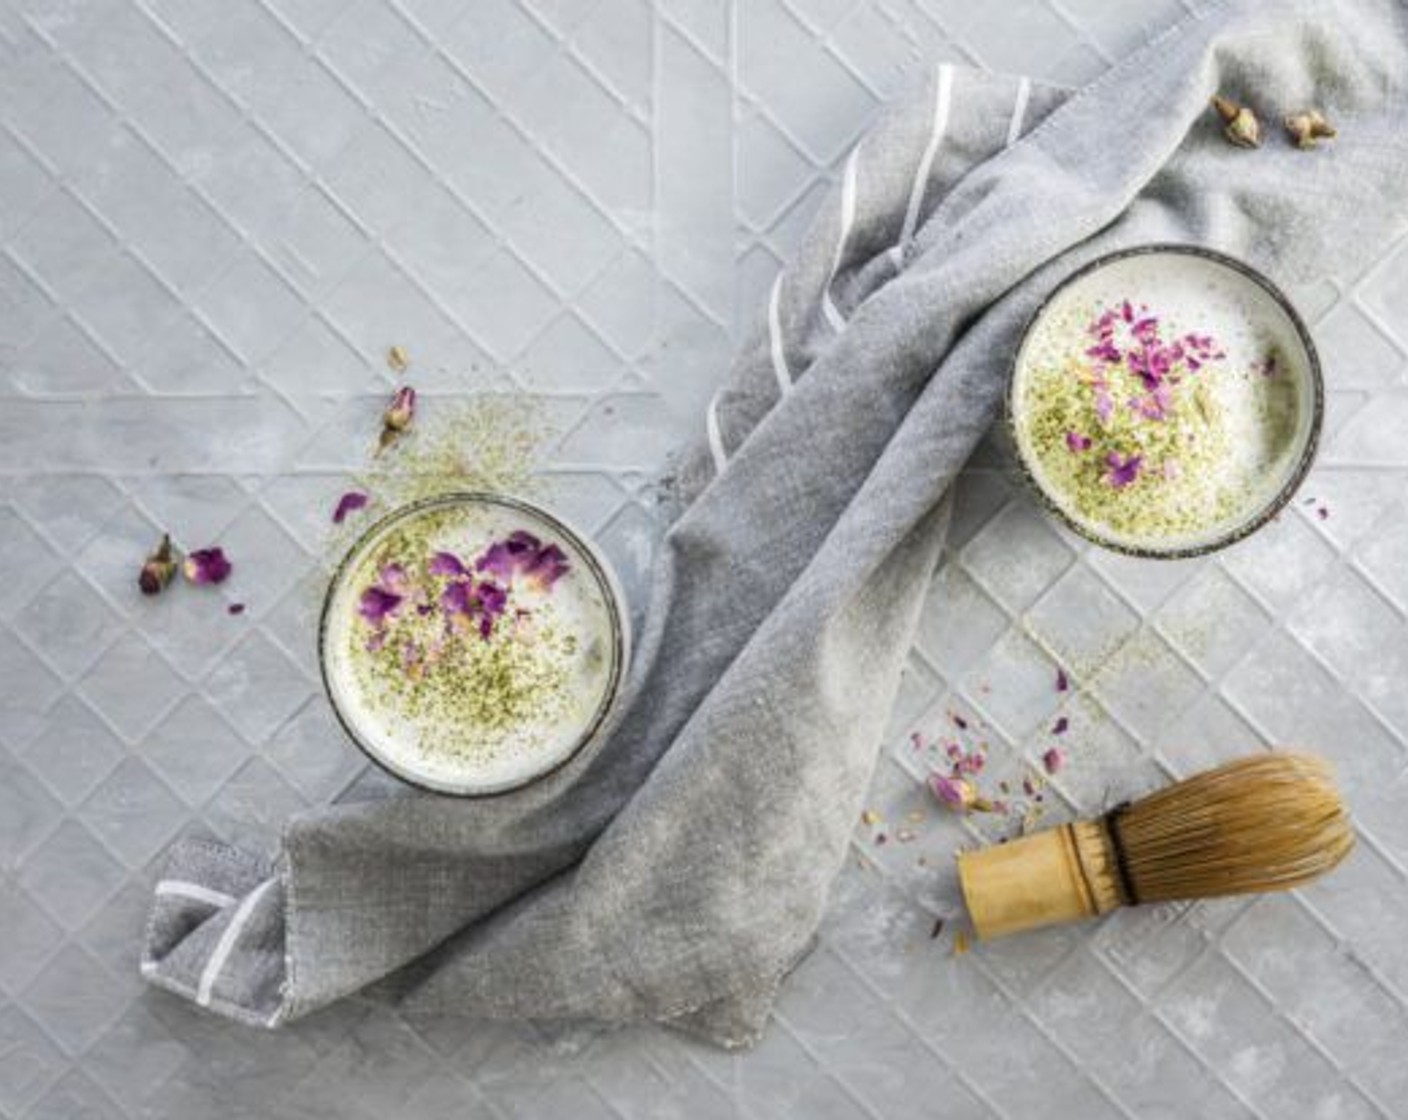 step 7 Pour into cups. Add Coconut Milk (1/2 cup) that you have heated and whisked in a different cup and sprinkle with extra matcha and Edible Dried Rose Petals (to taste). Enjoy!